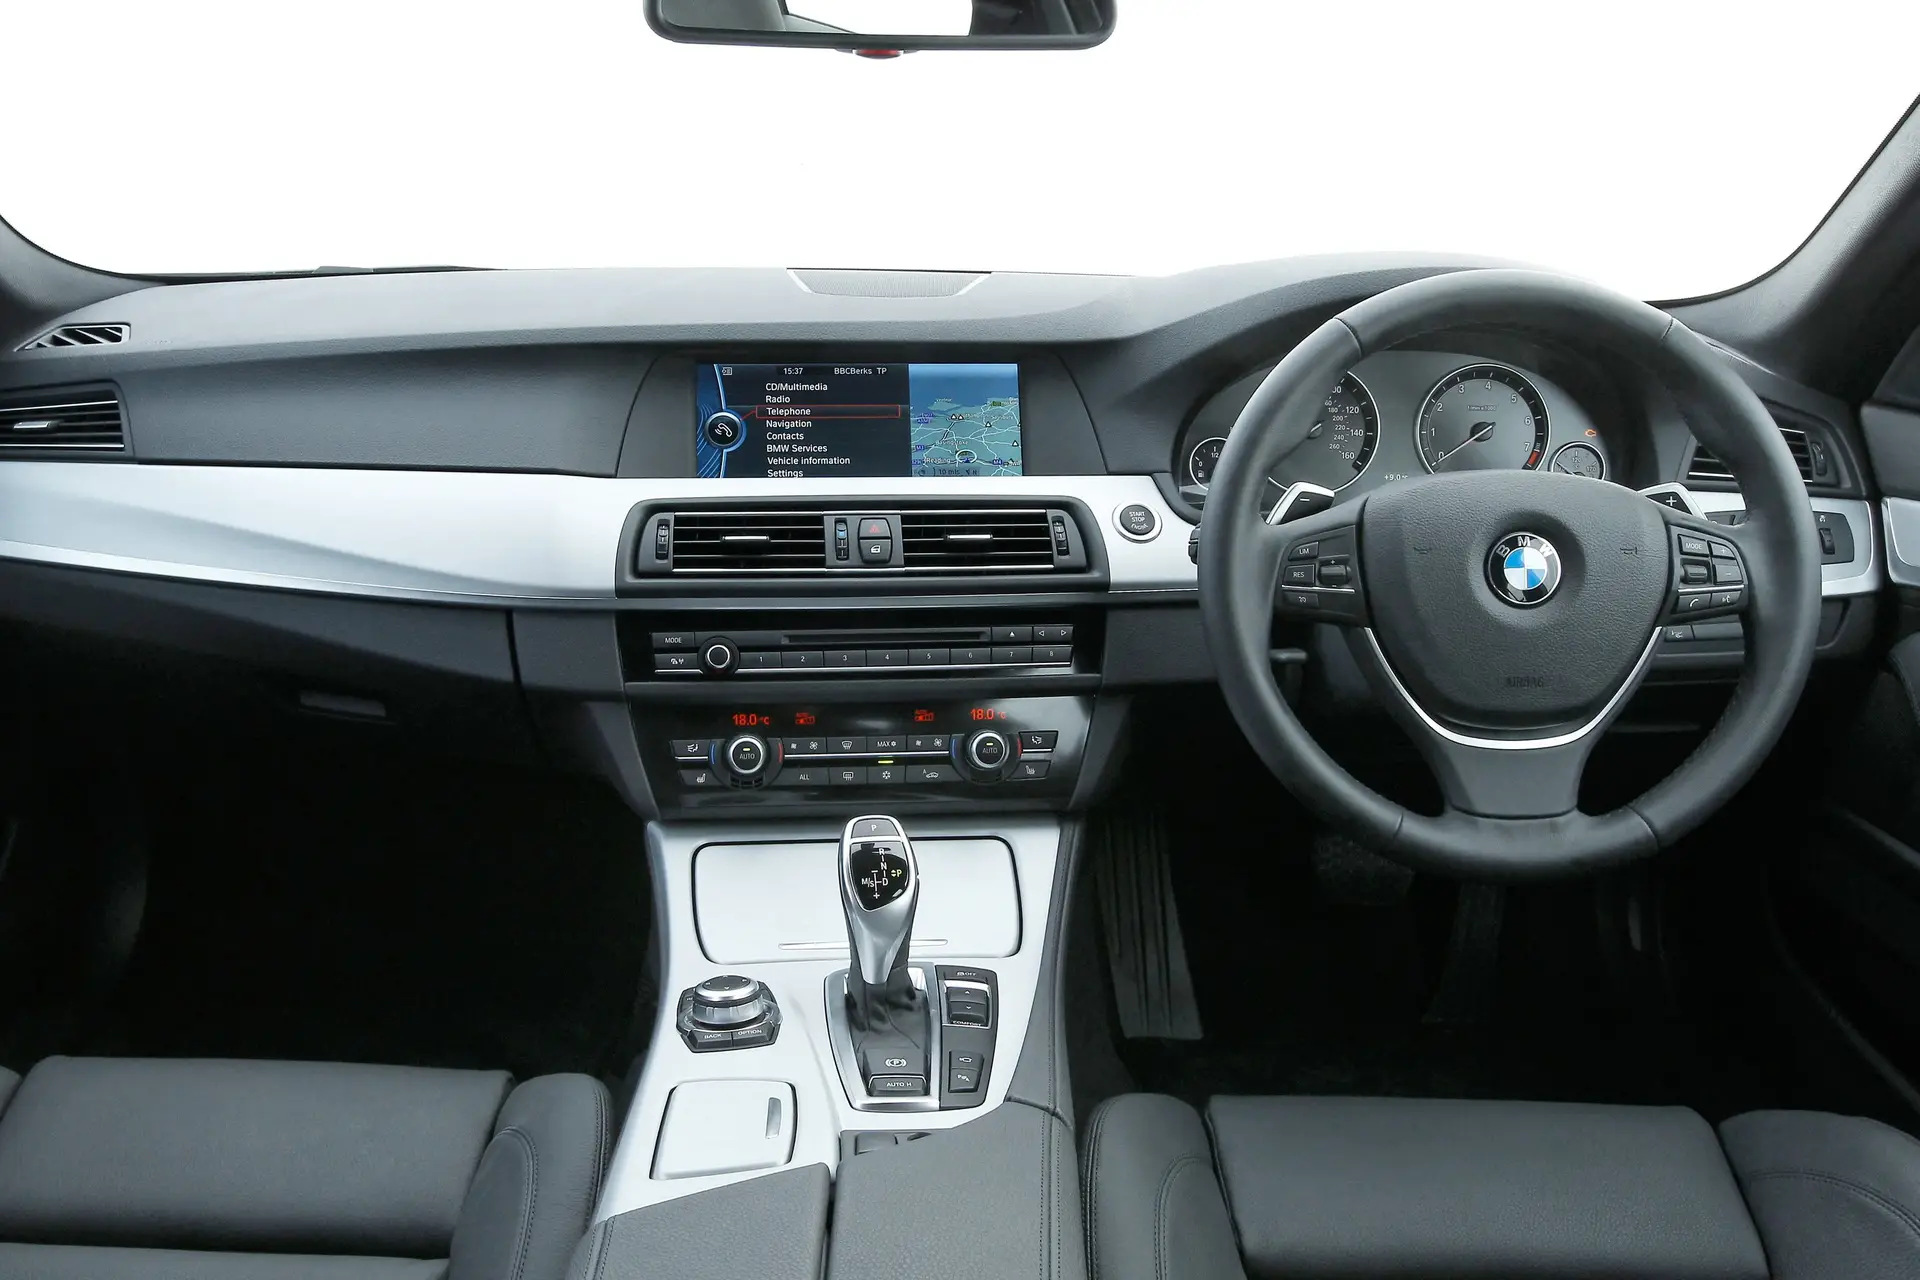 BMW 5 Series (2010-2017) Review: Interior close up photo of the BMW 5 Series dashboard